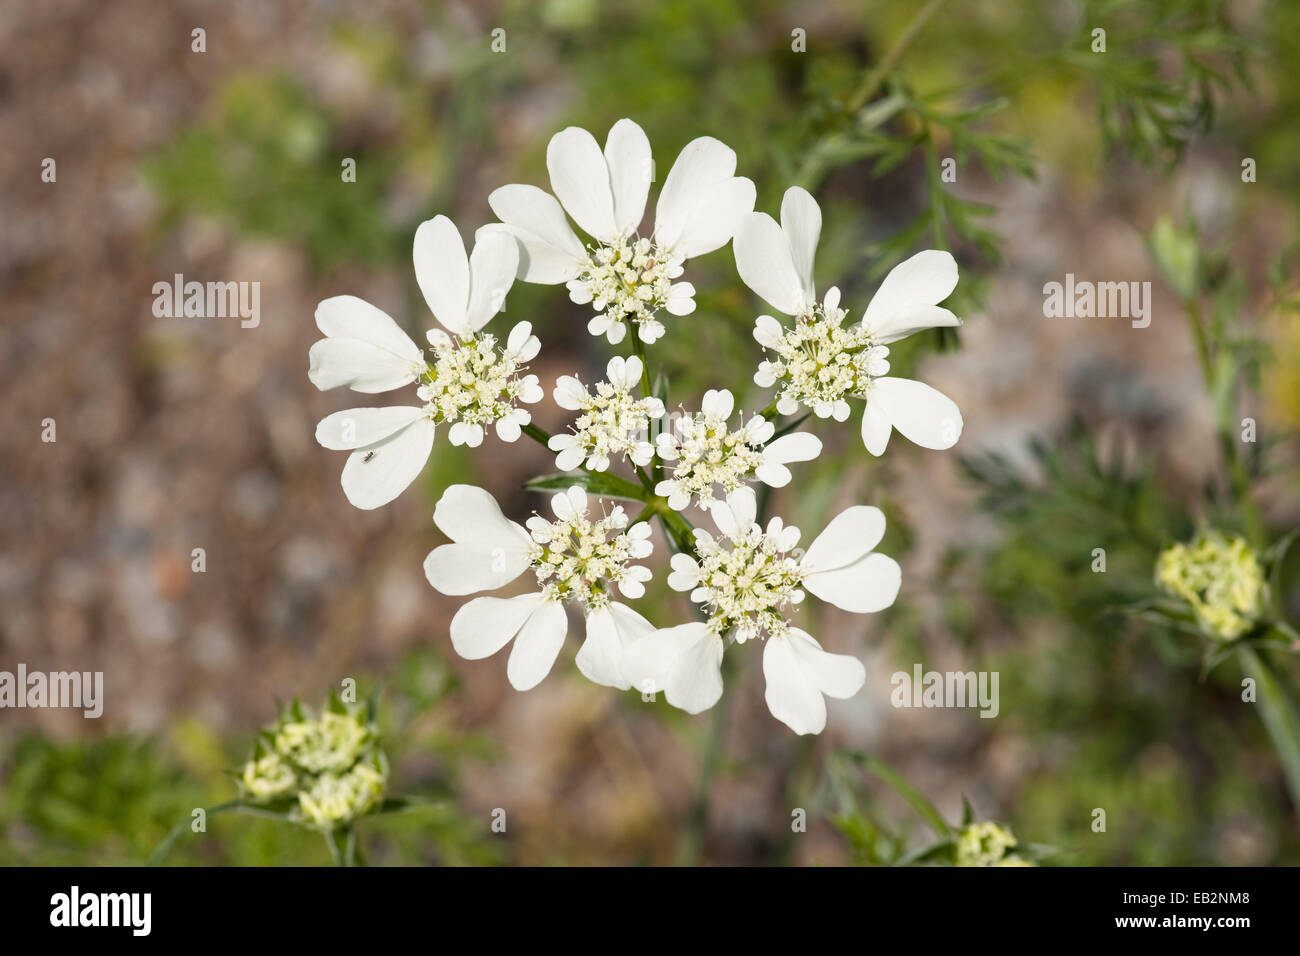 French Cow Parsley (Orlaya grandiflora), flowering, native to the Mediterranean, Thuringia, Germany Stock Photo